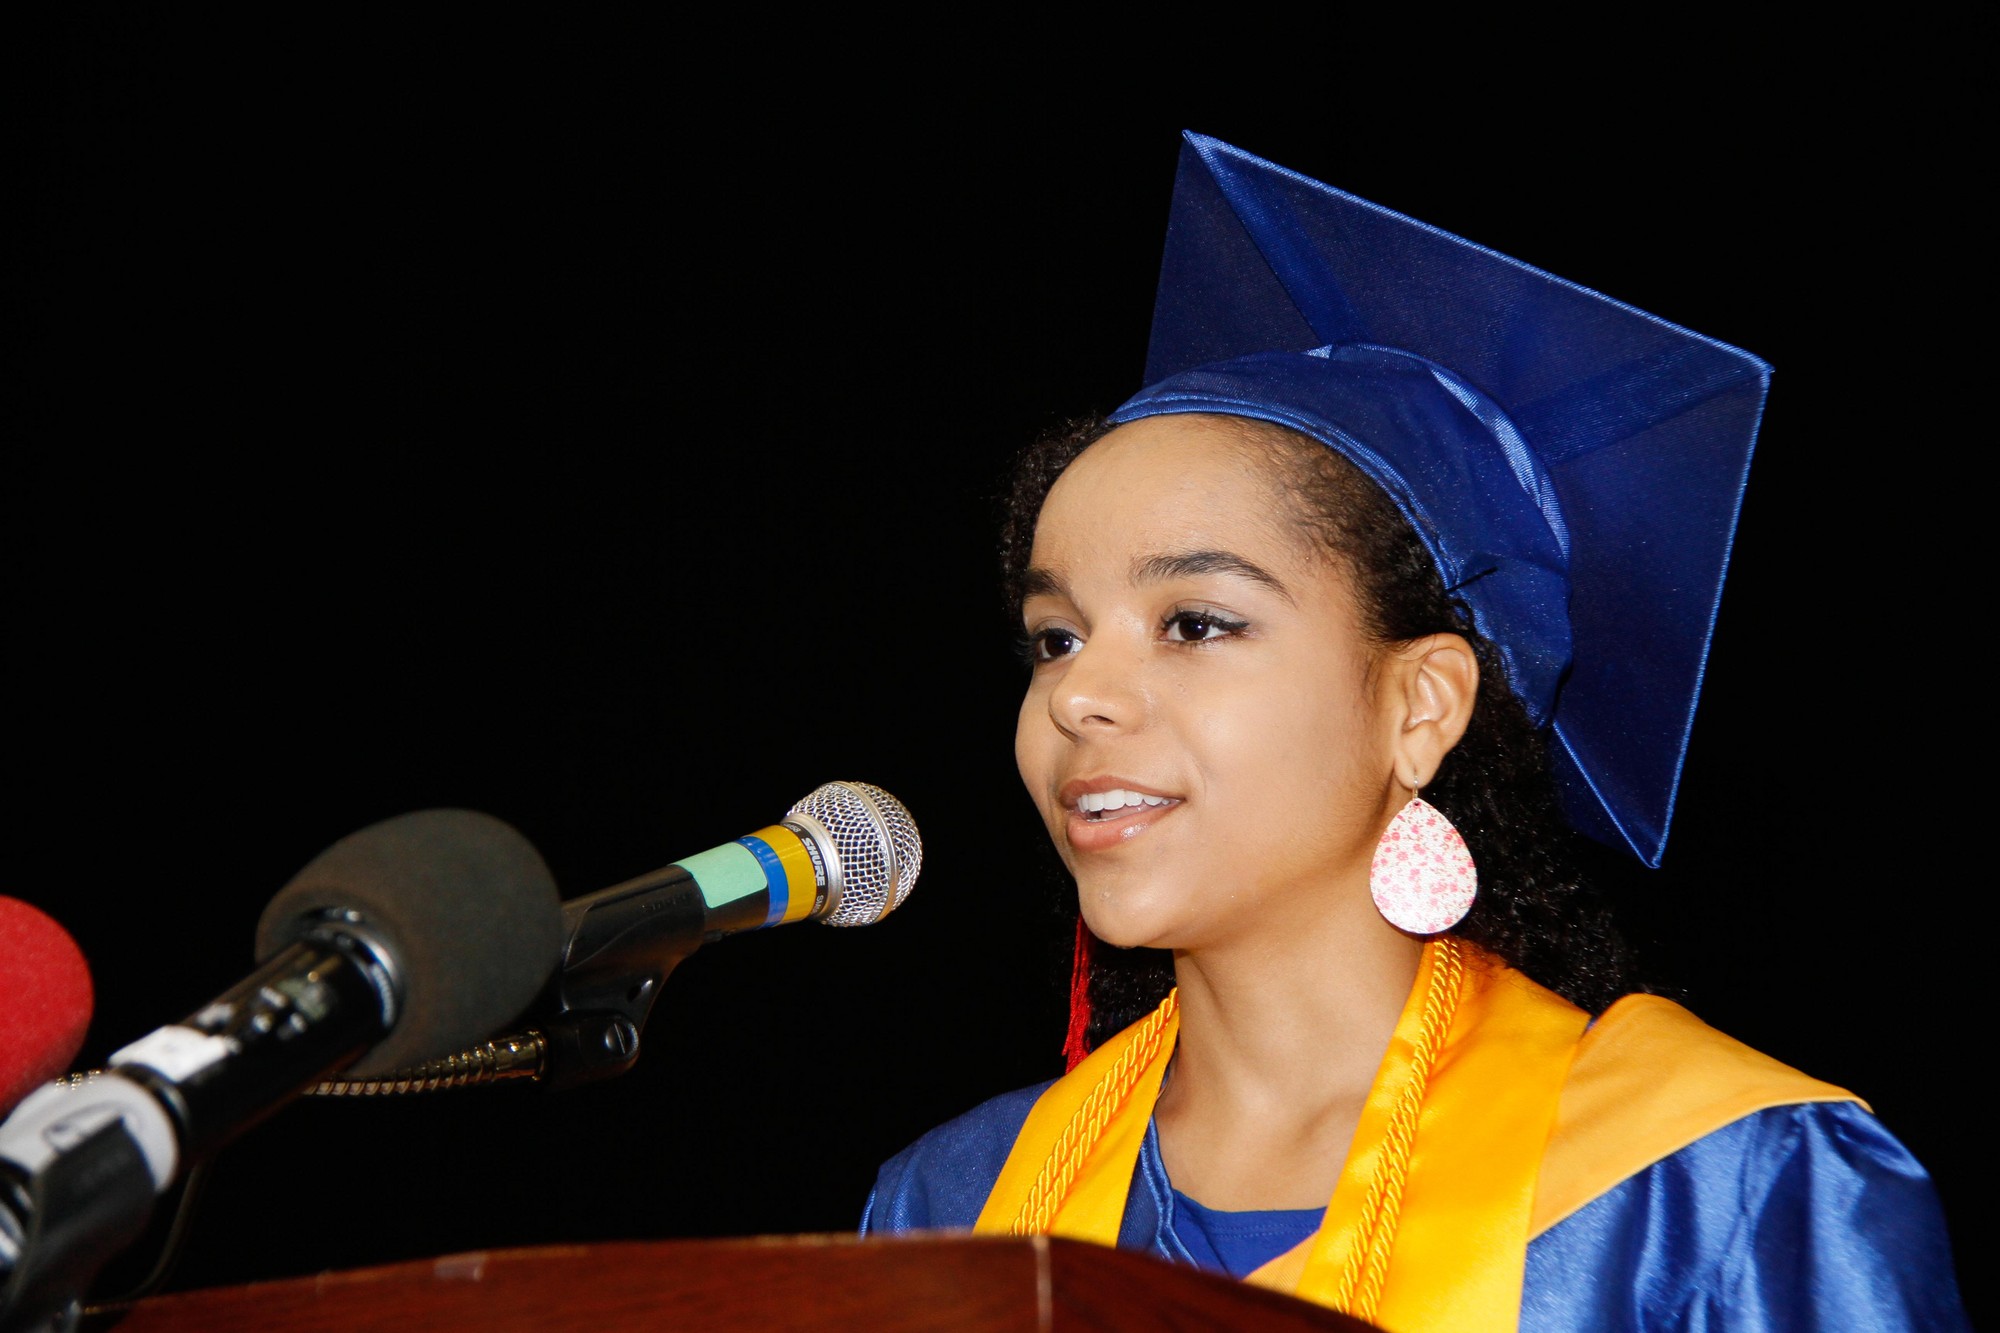 Valedictorian Justine Hamilton spoke of the differences and commonalities of the class of 2013.